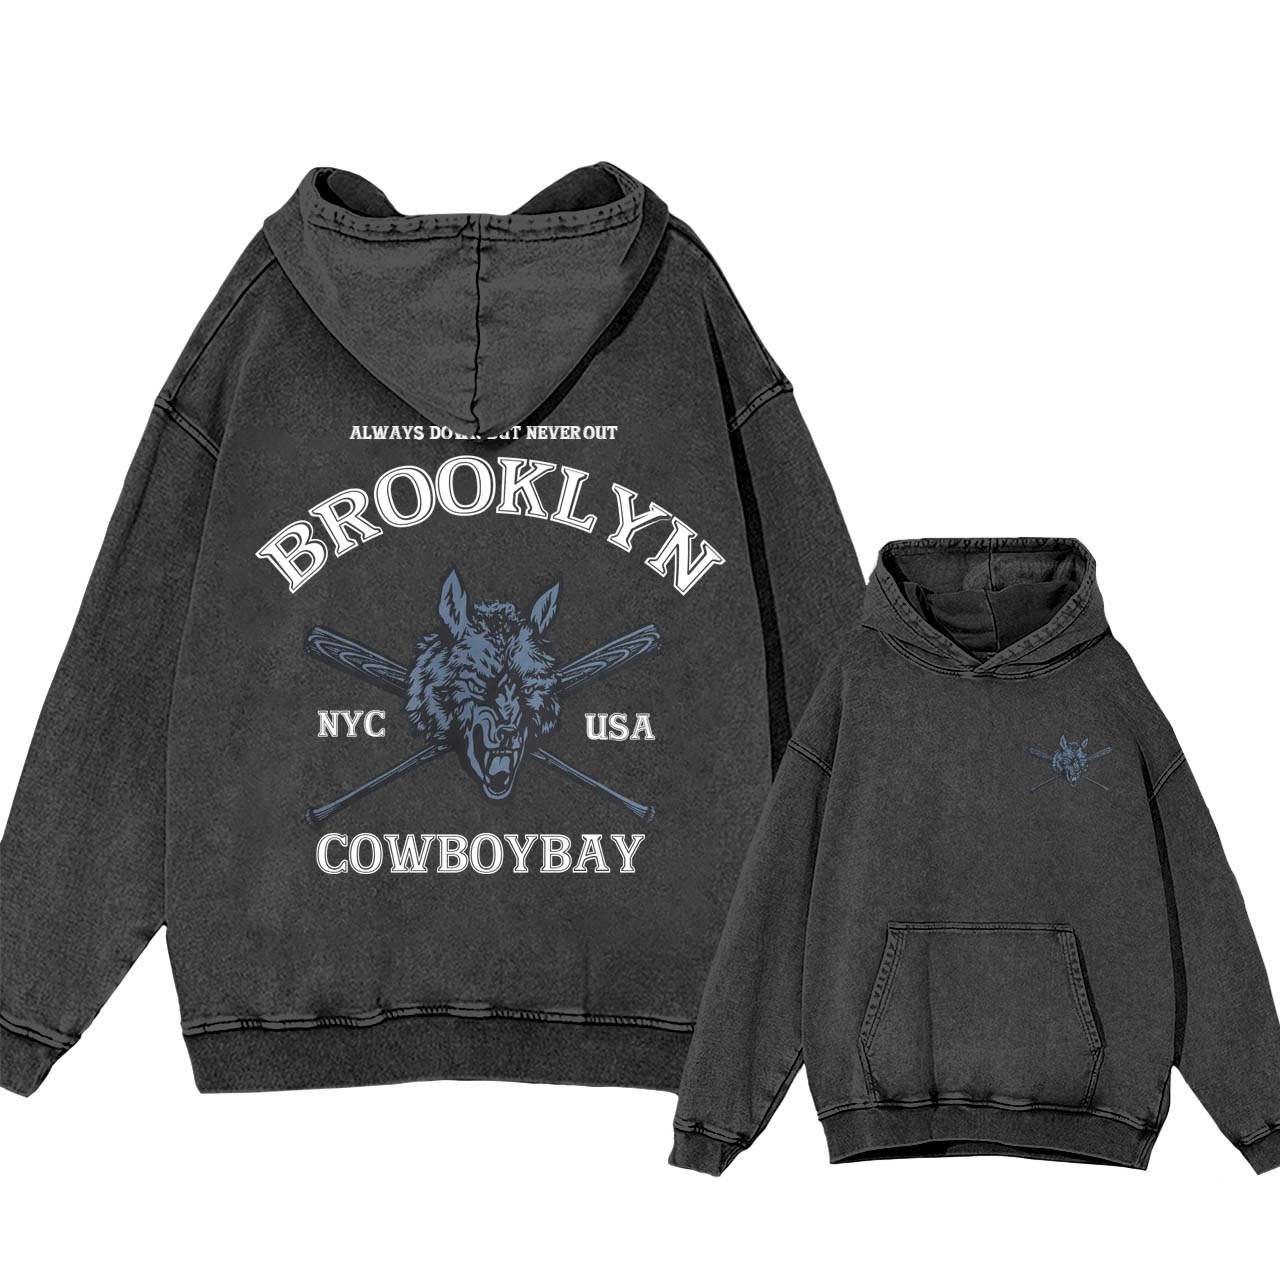 Always Down But Never Out Cowboybay Garment-Dye Hoodies